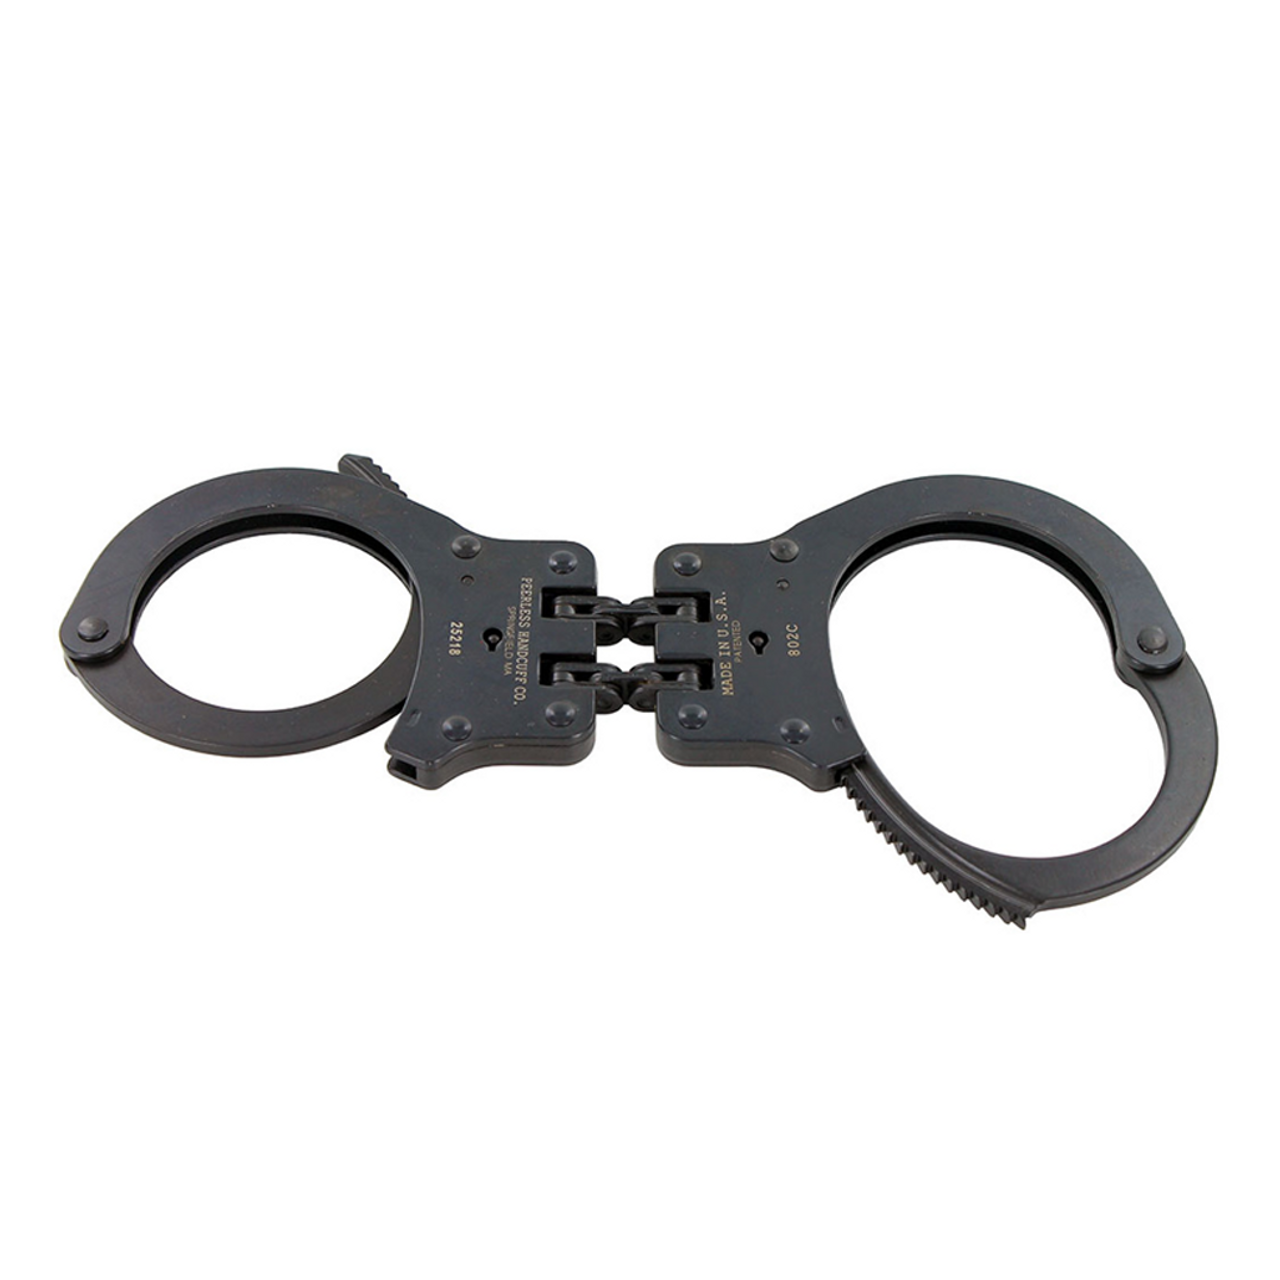 Handcuff carrier for Peerless and S&W – McKinaTec